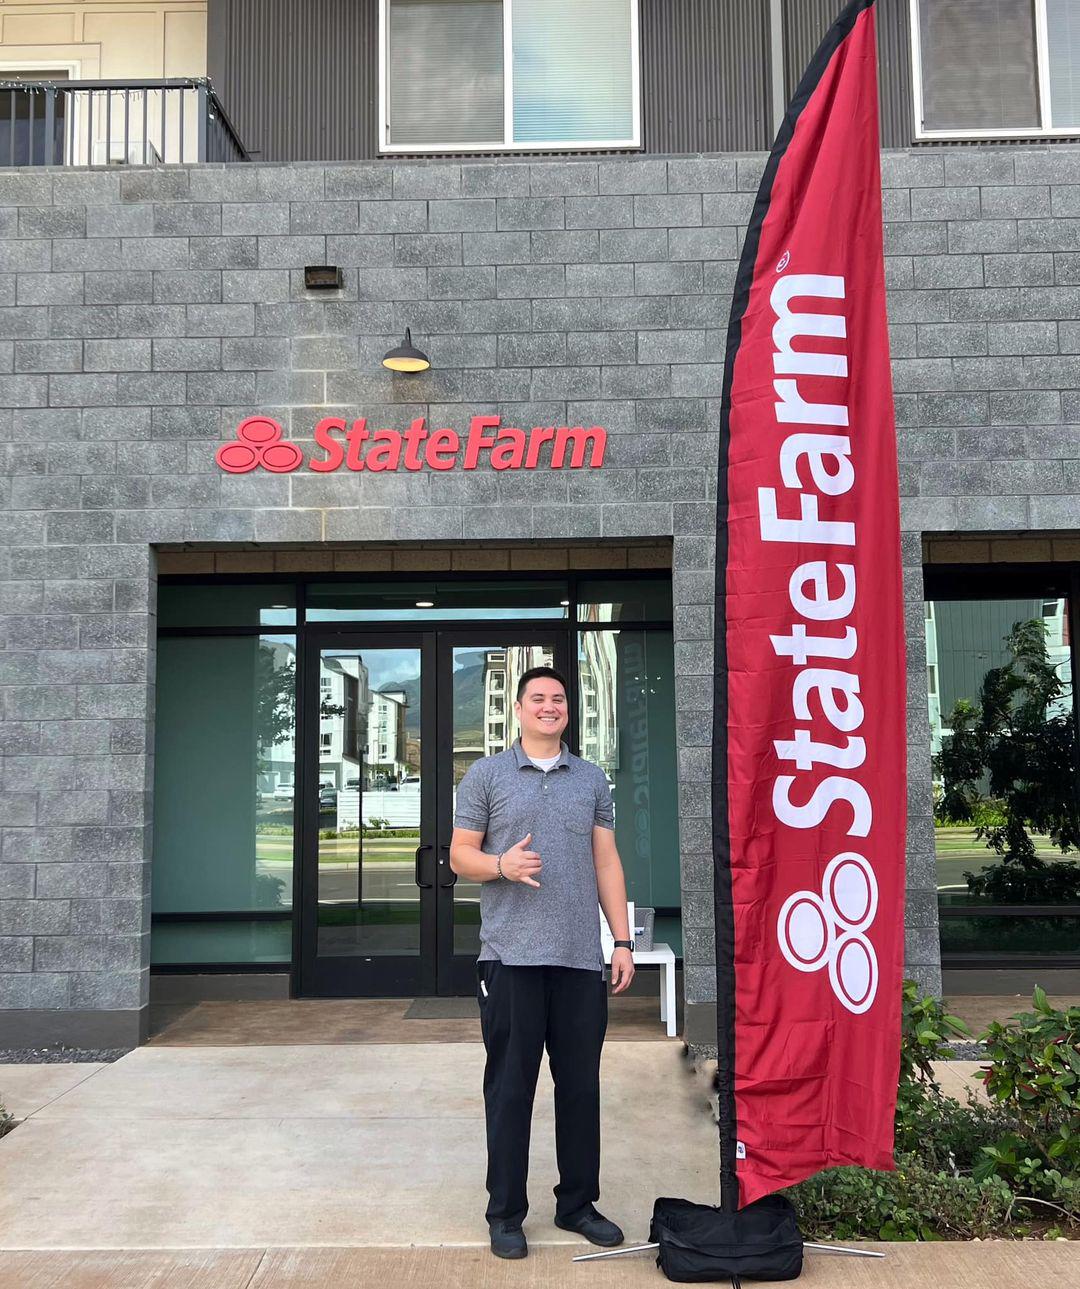 Look for the red flag to easily find our new Ho’opili office! 
📍91-3575 Iwikuamoo St Suite 9005, Ewa Beach, HI 96706
☎️ (808) 674-4144
We are also in Hawaii Kai, located in Koko Marina Center!
📍7192 Kalanianaole Hwy Suite G231, Honolulu, HI 96825
☎️ (808) 395-3434